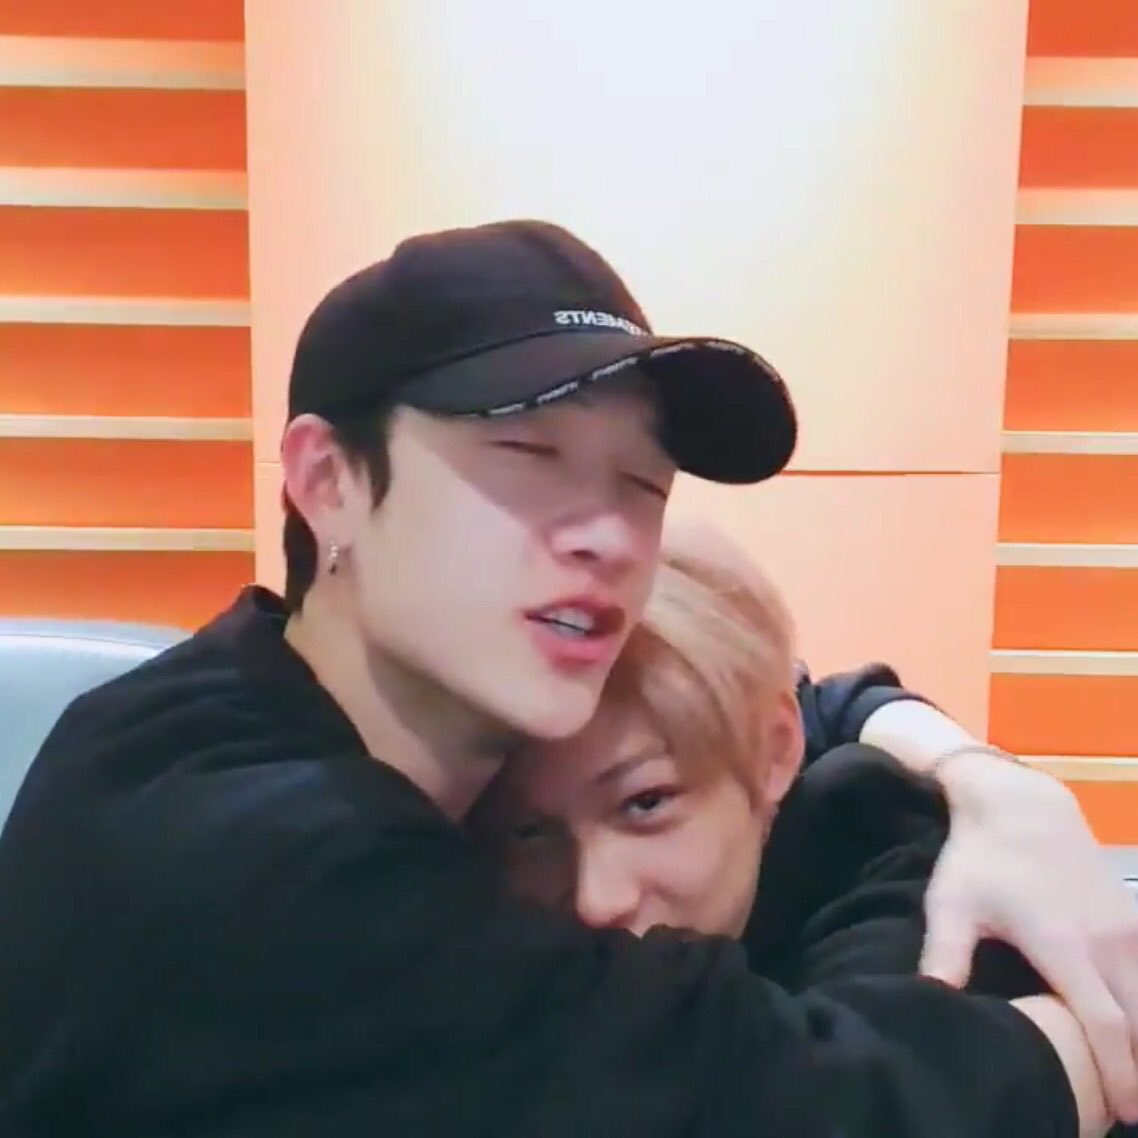 how felix lets jisung cuddle him backstage, so he can sleep better surprising seungmin on his bd w cake, candles and a hbd signspeaking in english w chan so he feels more like home, & he’ll be able to say anything w/o any language barrierbuying hyunjin first ever cologne